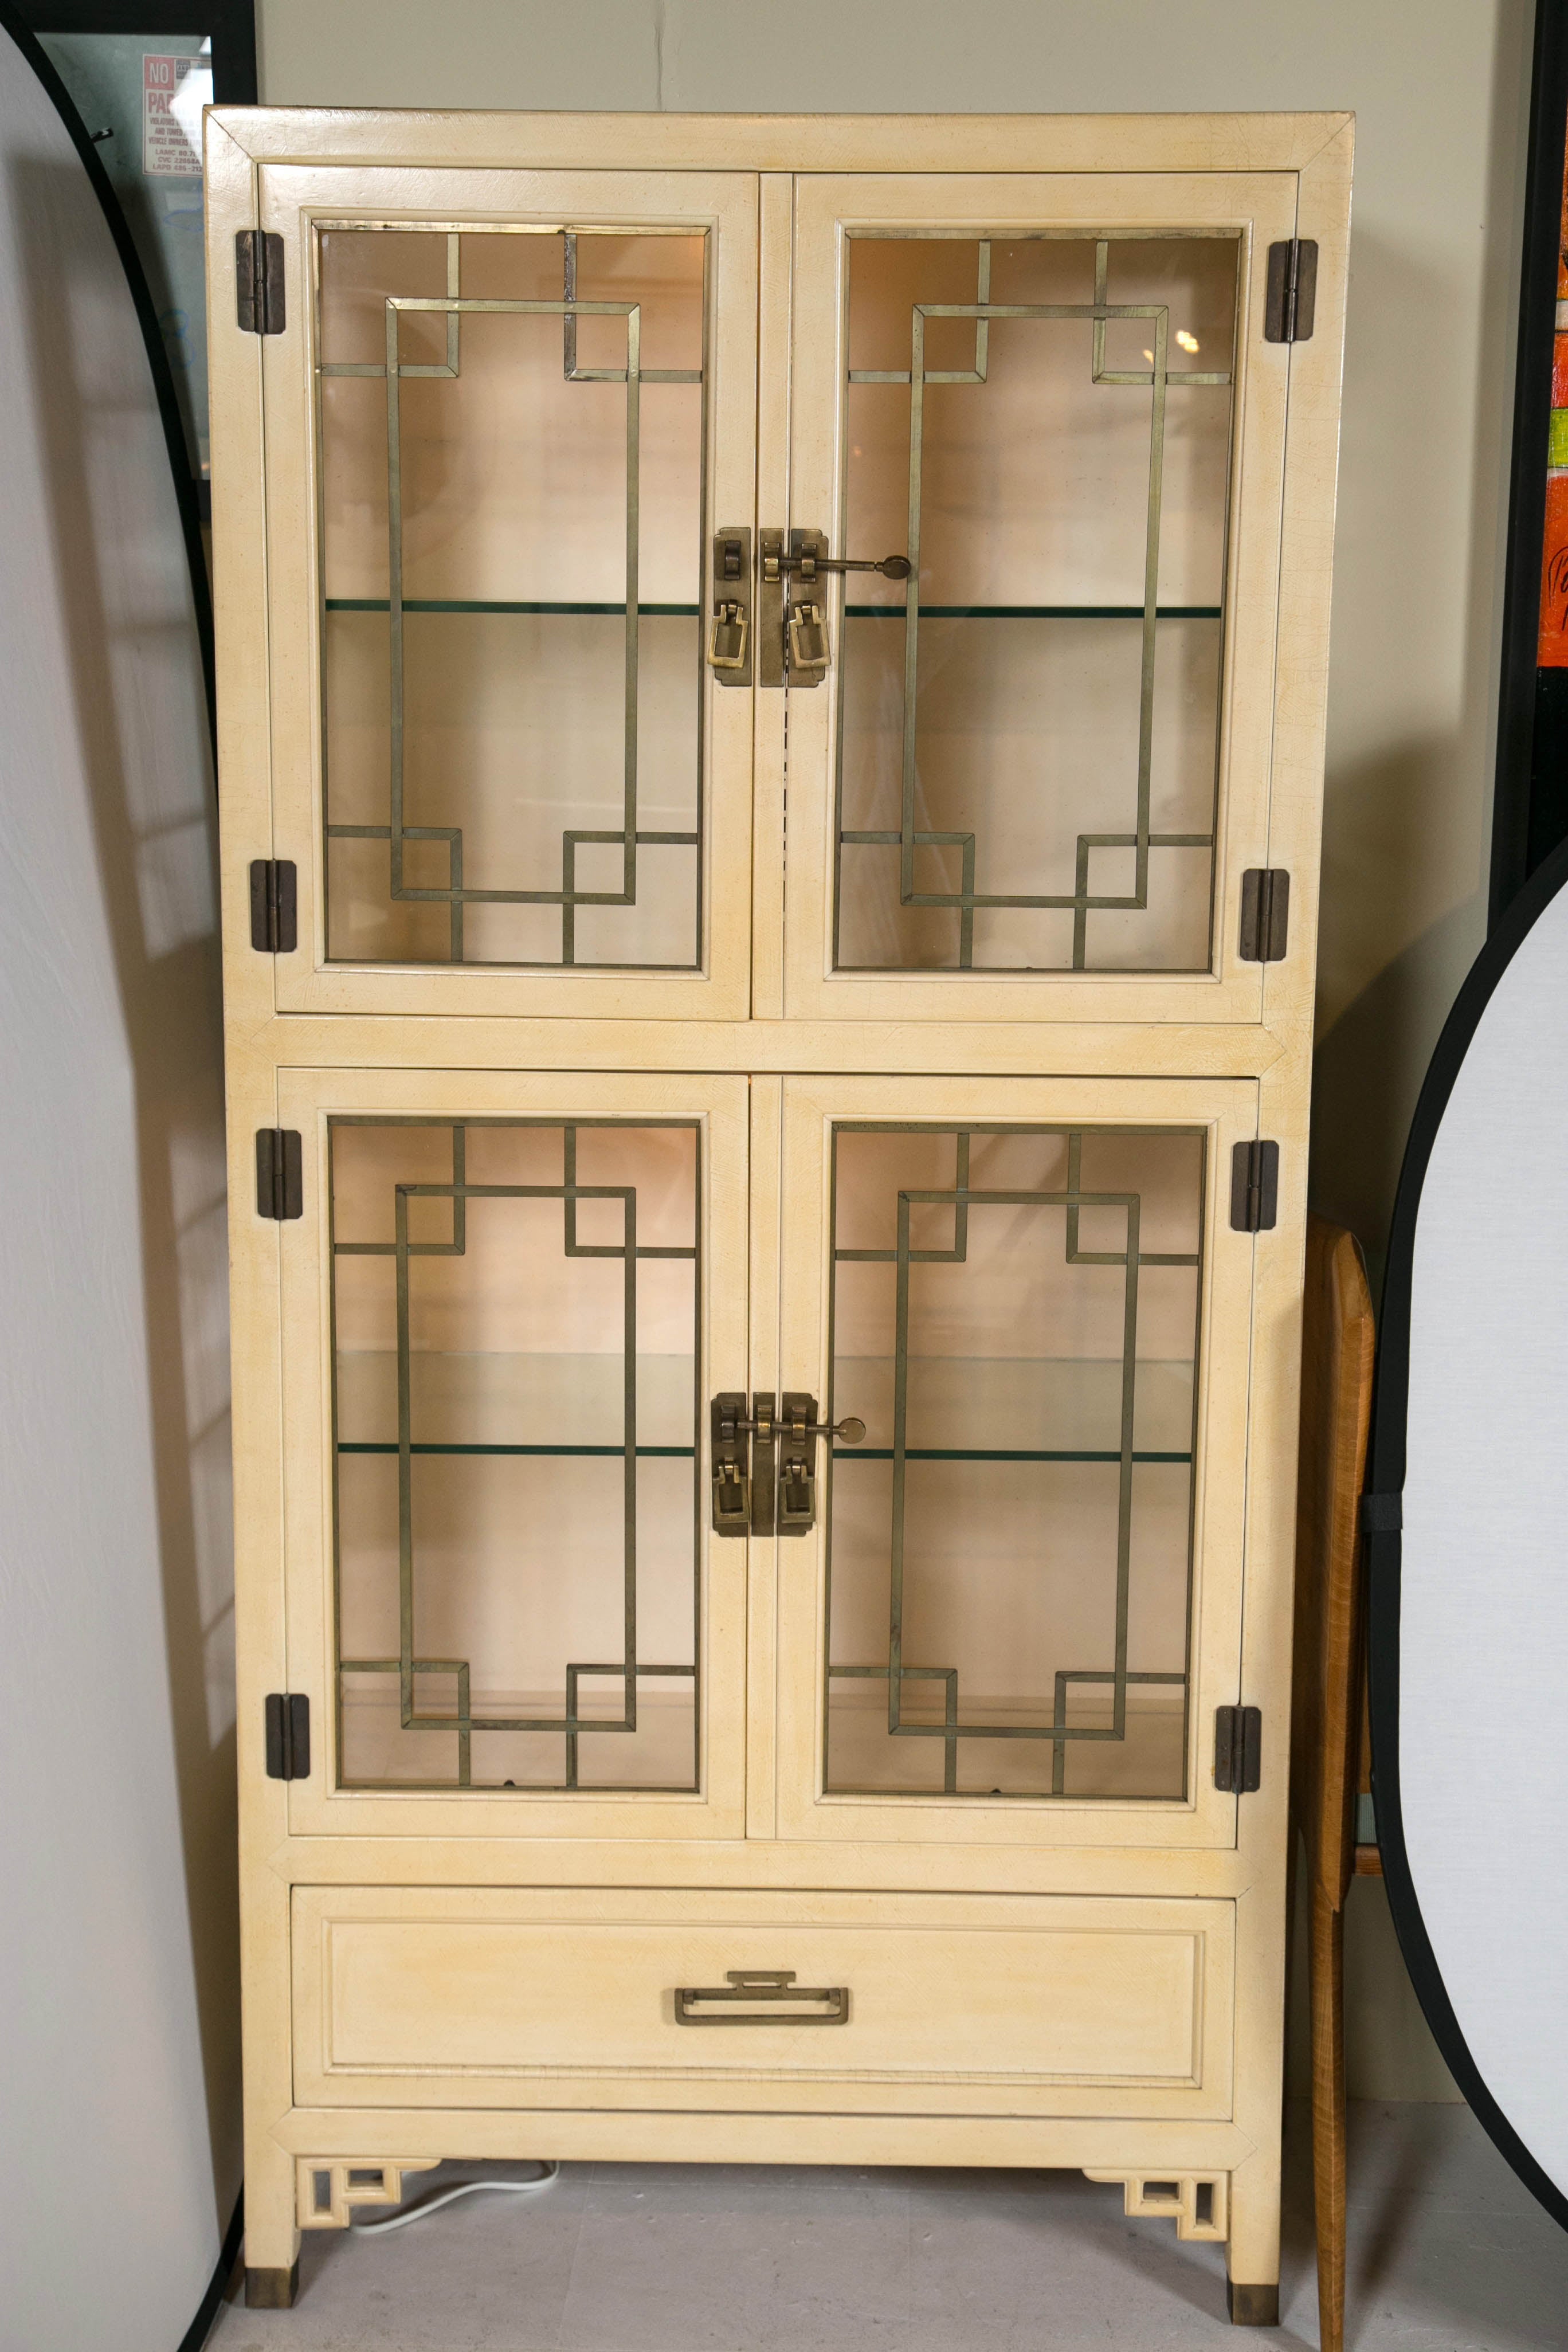 Pair of display cabinets by Century America a Asian styling with brass fittings.